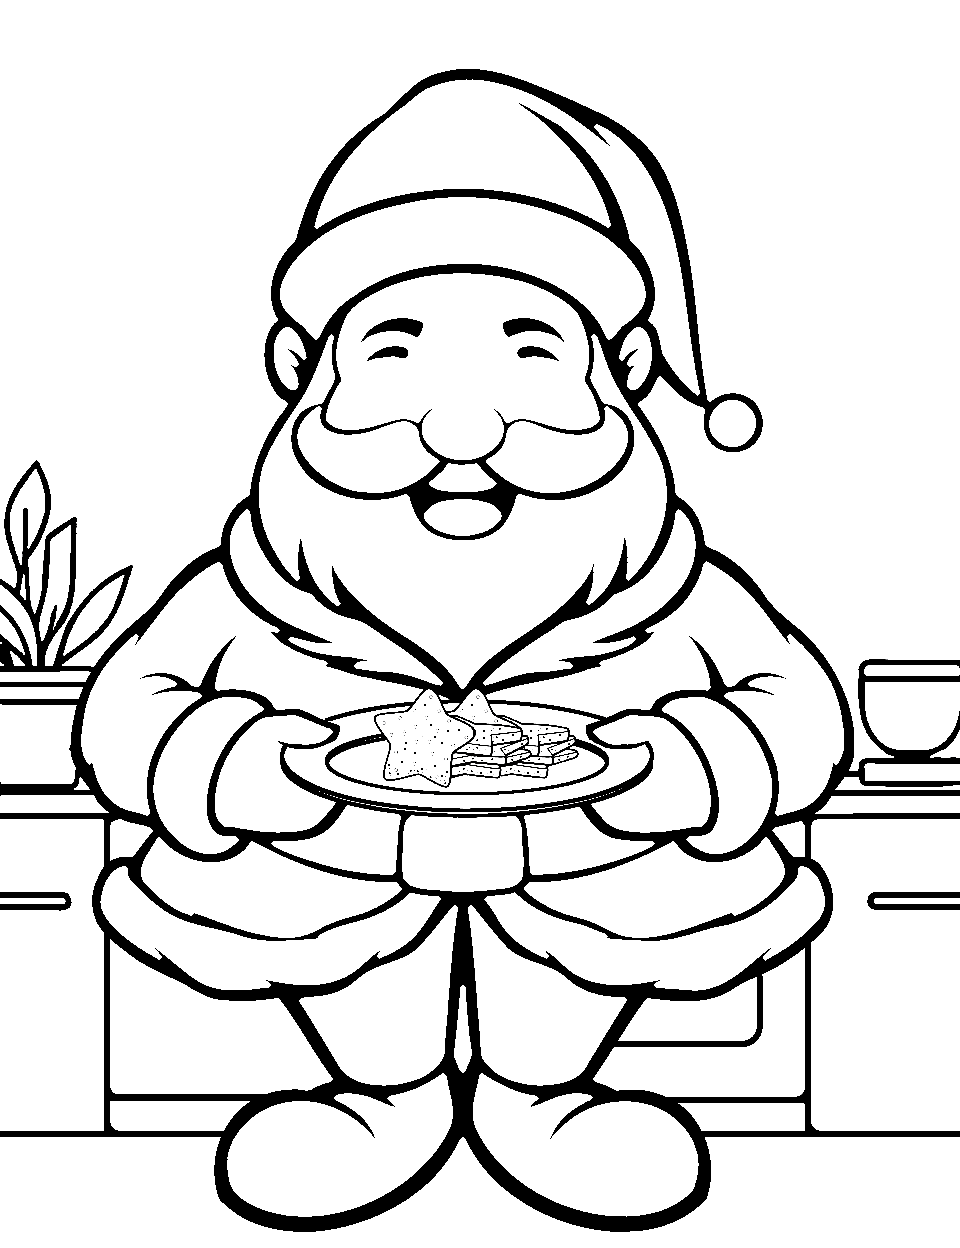 Mr. Claus Baking Cookies Santa Coloring Page - Mr. Claus in his kitchen, baking a batch of Christmas cookies.